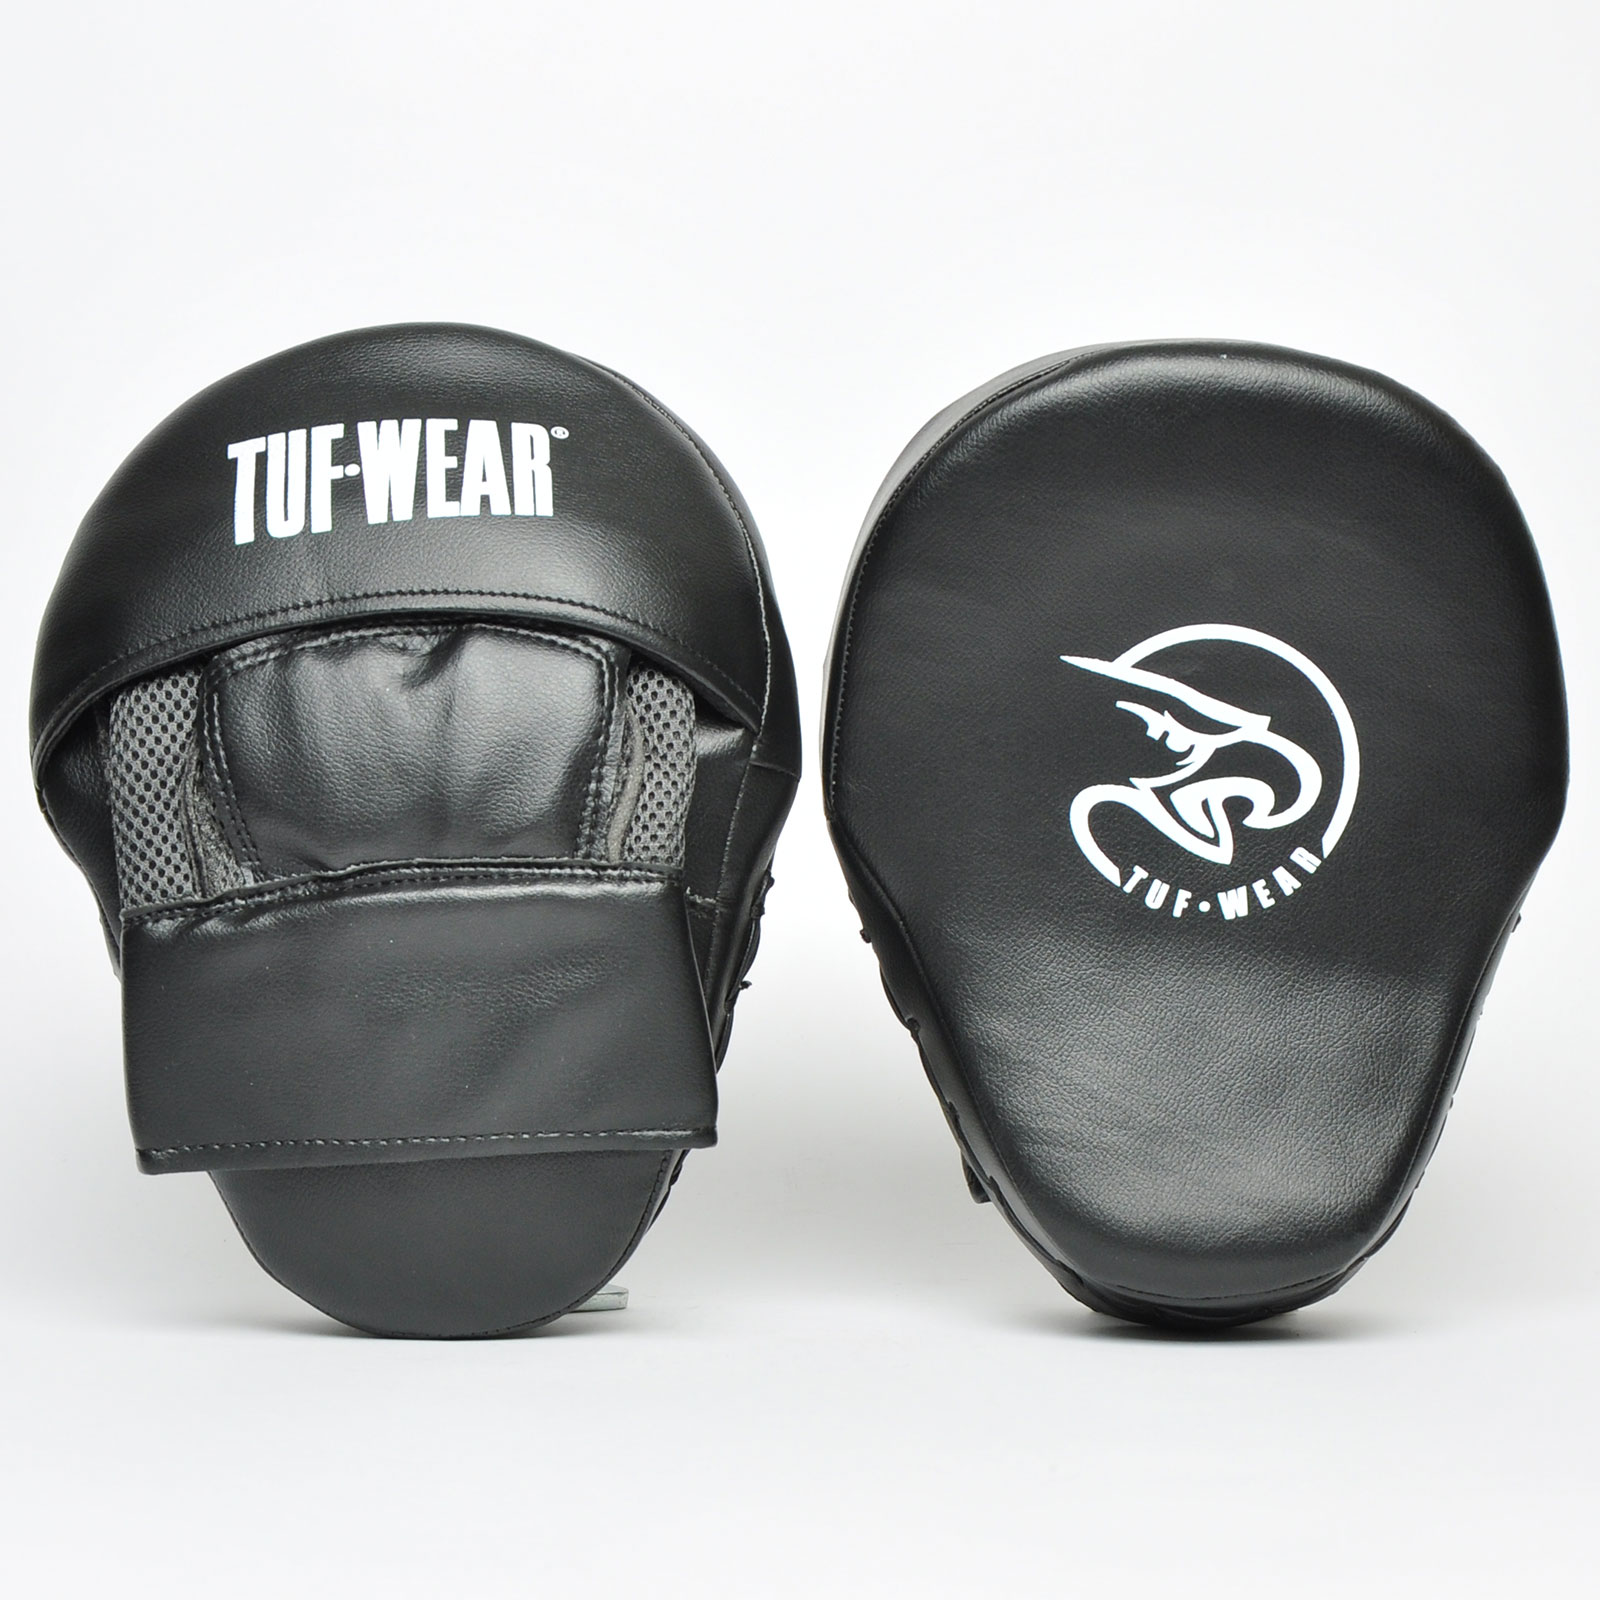 Tuf Wear Victor Gel Curved Hook and Jab Focus Pad White Gold 